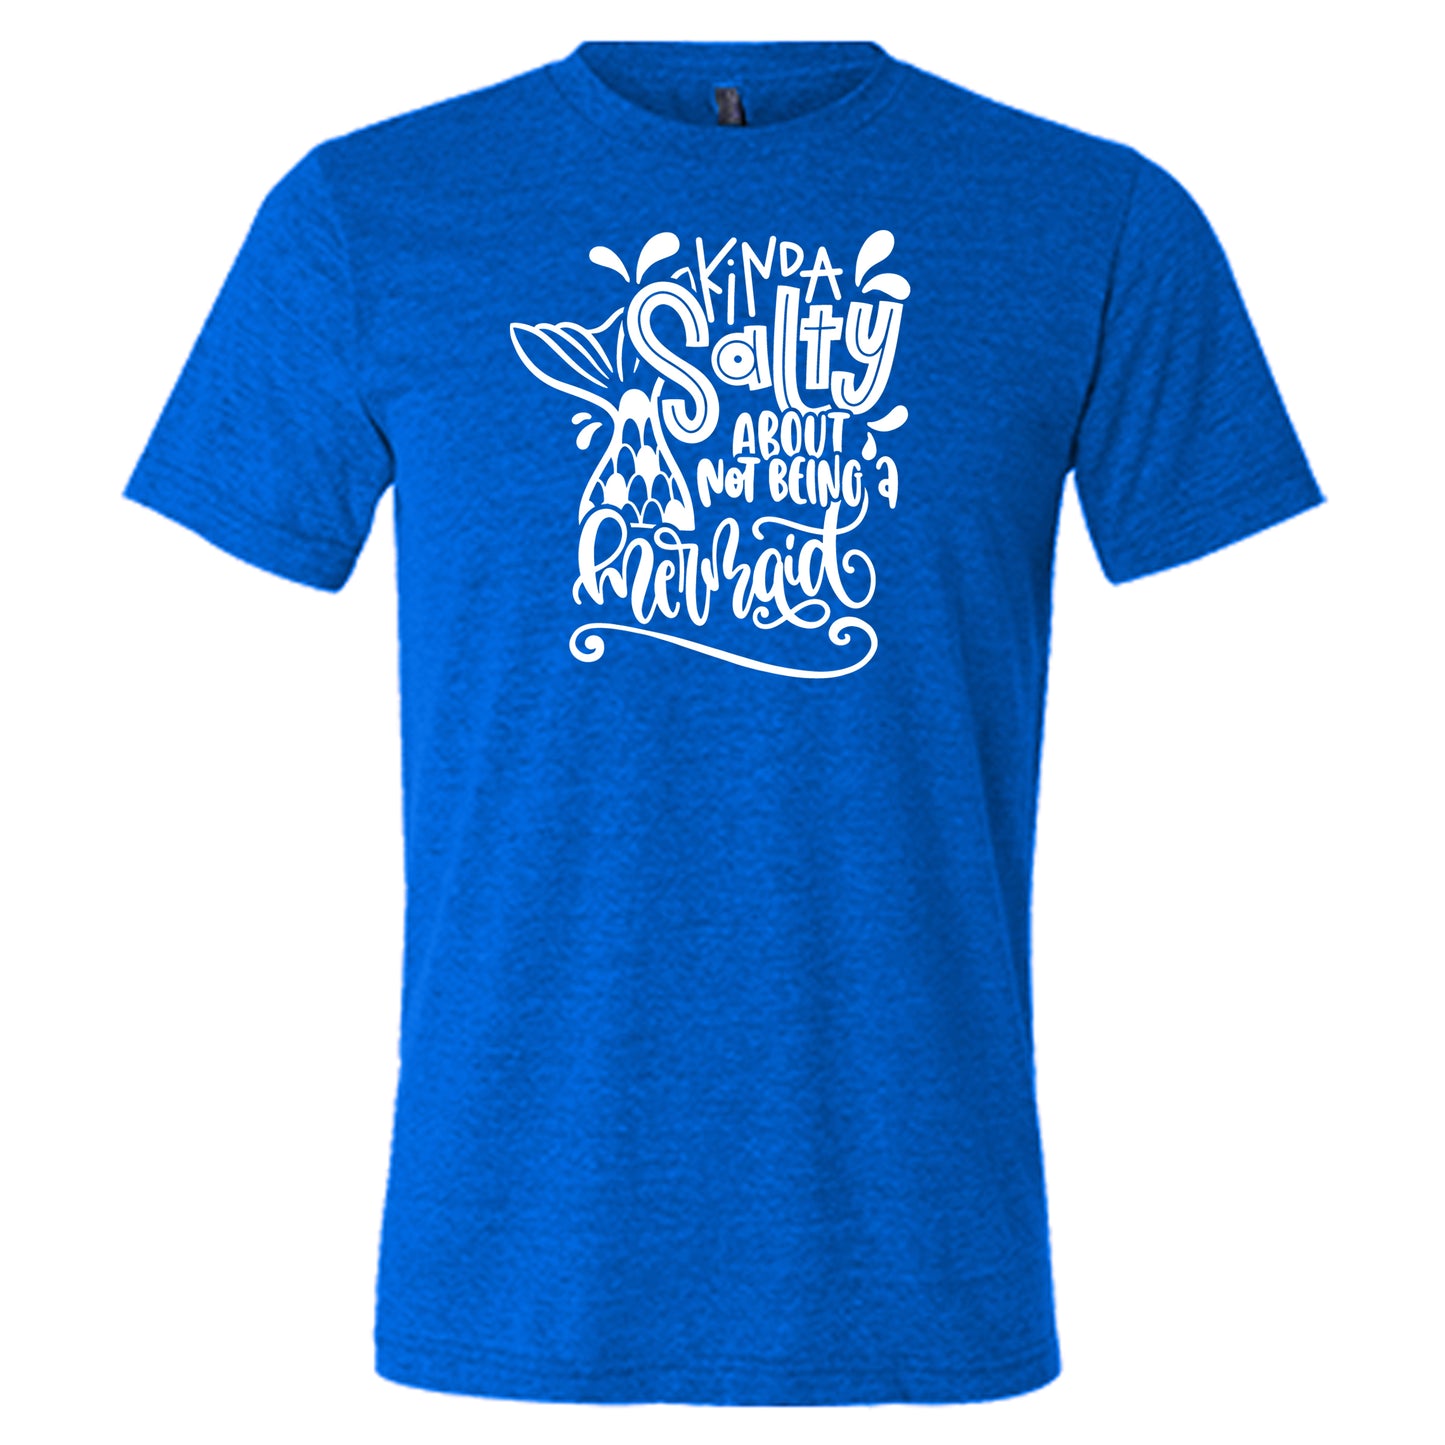 blue unisex tee with the saying "kinda salty about not being a mermaid" in the center